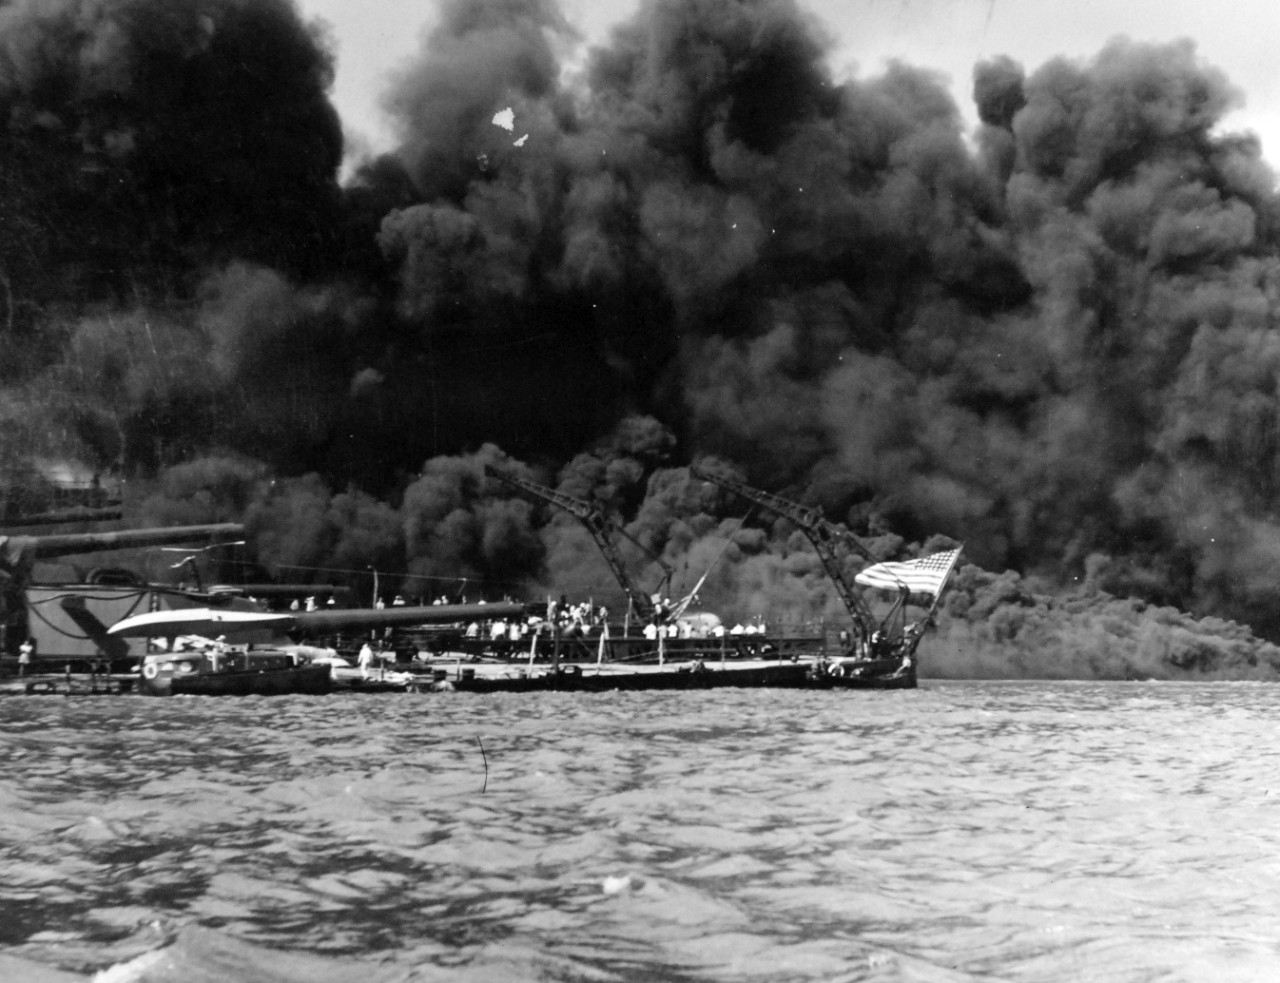 80-G-32754:   Japanese Attack on Pearl Harbor, December 7, 1941.  USS West Virginia (BB 48) is shown after the attack. Official U.S. Navy photograph, now in the collections of the National Archives.  (9/9/2015).